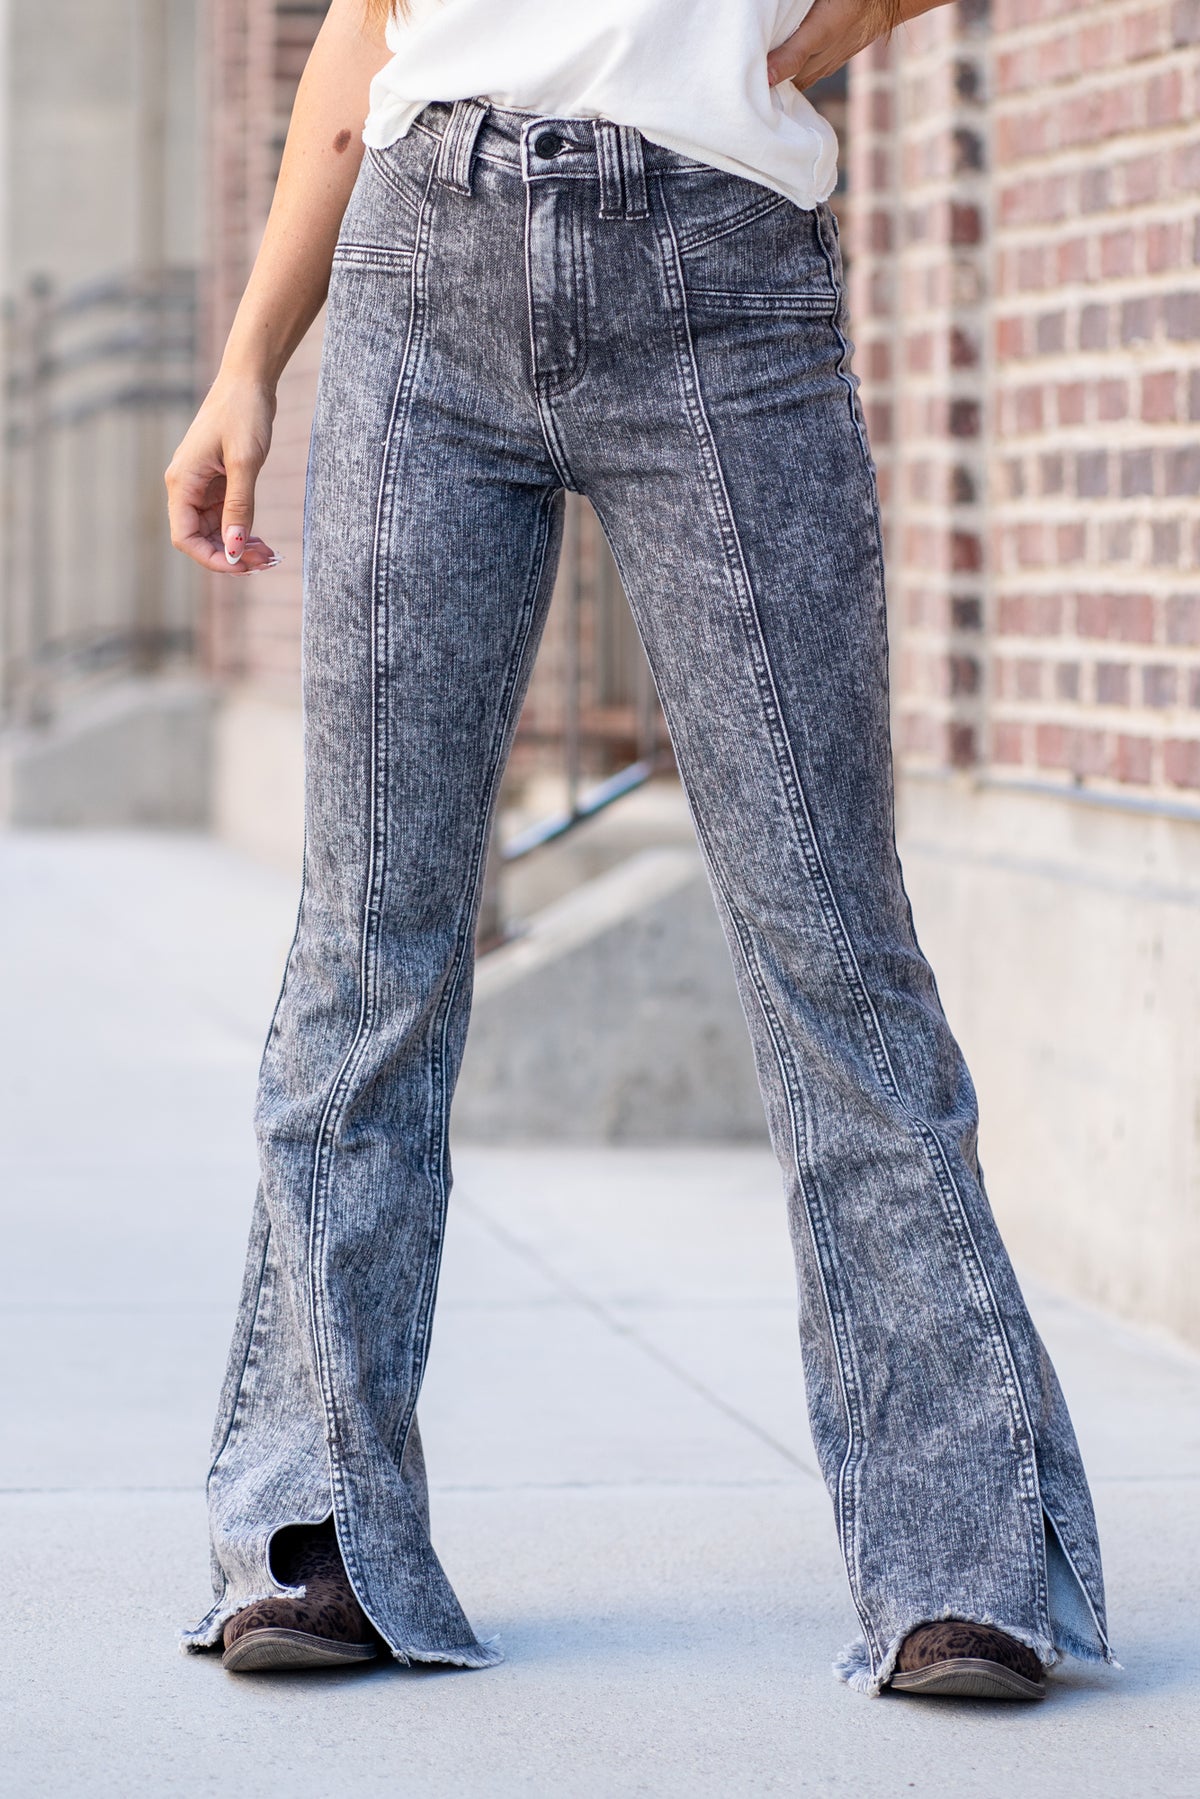 KanCan Jeans    Fray hem with a split hem and a front seam with a high waist.  Color: Grey Wash  Cut: Flare, 33" Inseam  Rise: High Rise, 11.5" Front Rise 99% COTTON , 1% SPANDEX Fly: Zipper Fly Style #: KC9314GR Contact us for any additional measurements or sizing.    *Measured on the smallest size, measurements may vary by size. 